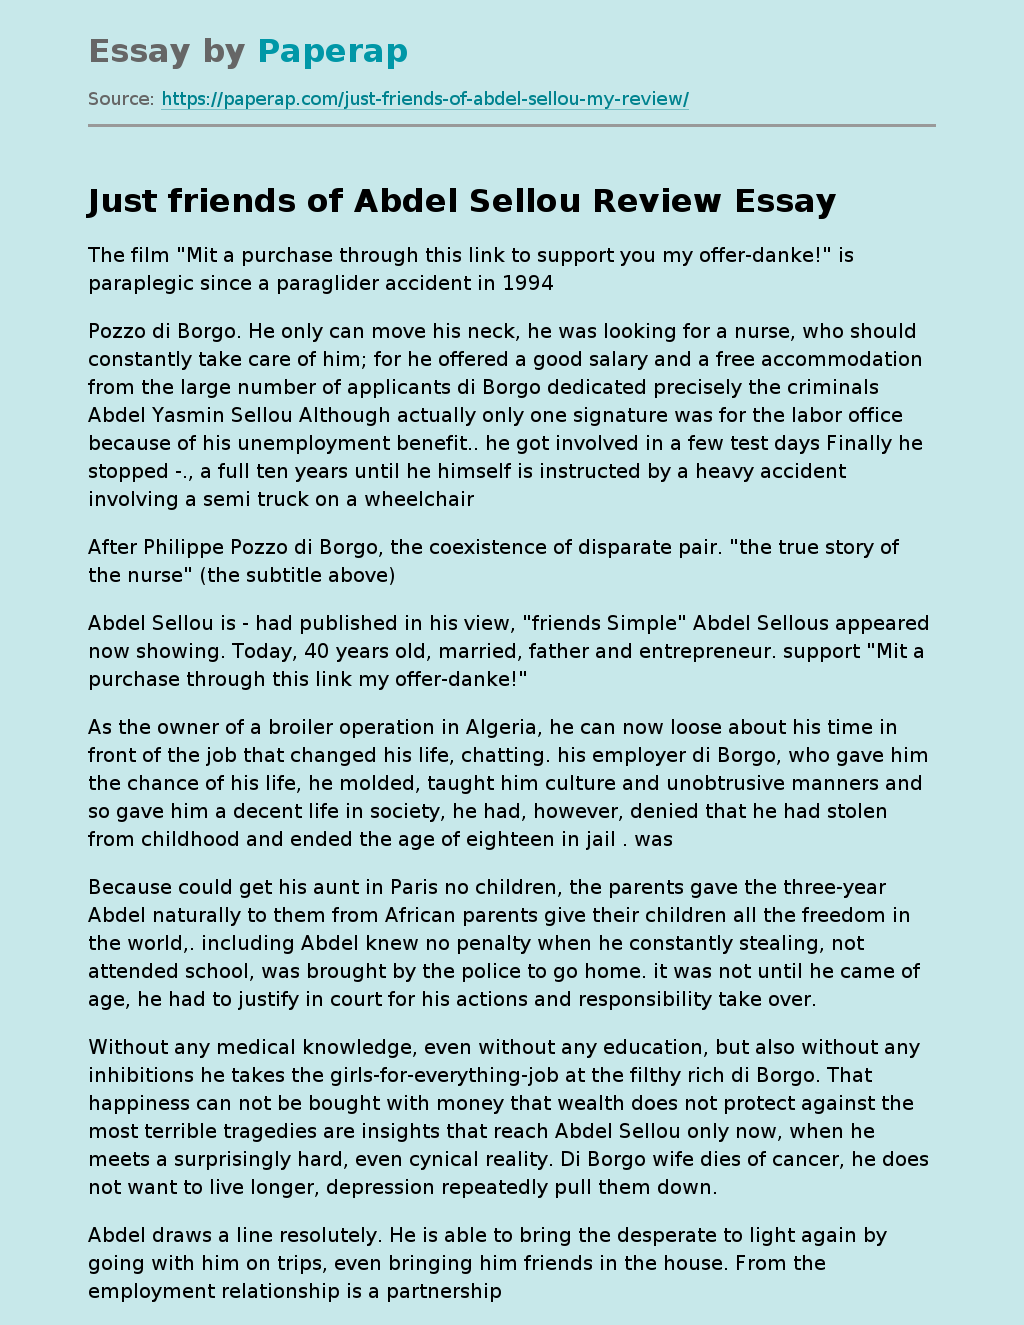 Just friends of Abdel Sellou Review